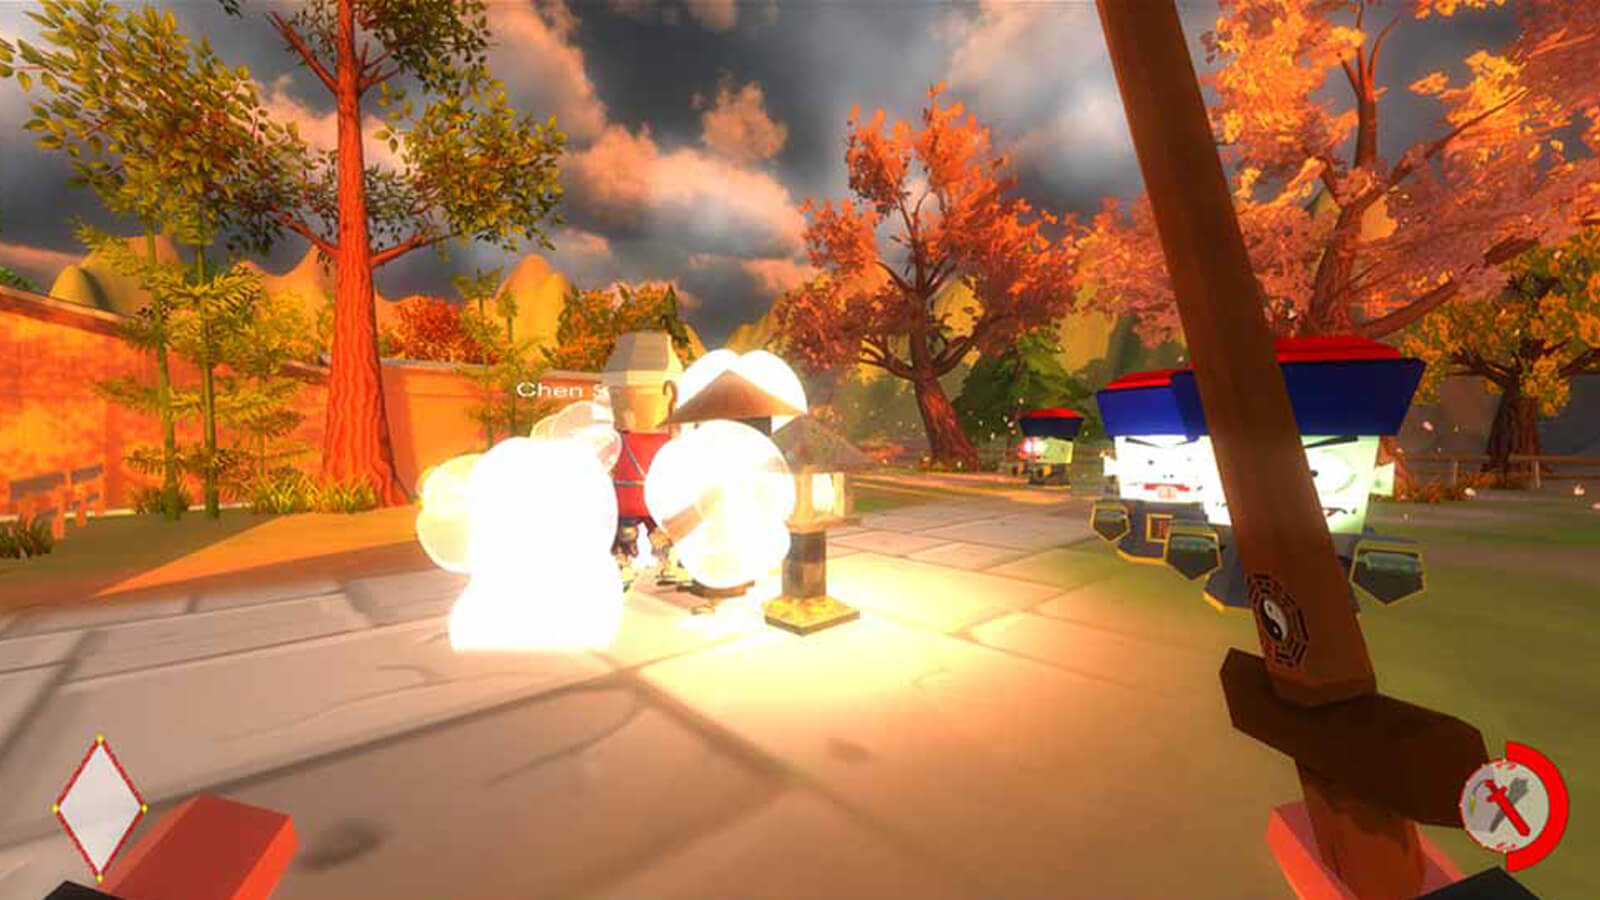 Two zombies come at the player in a first person view. The player's sword is seen and an exploding enemy is on the left.